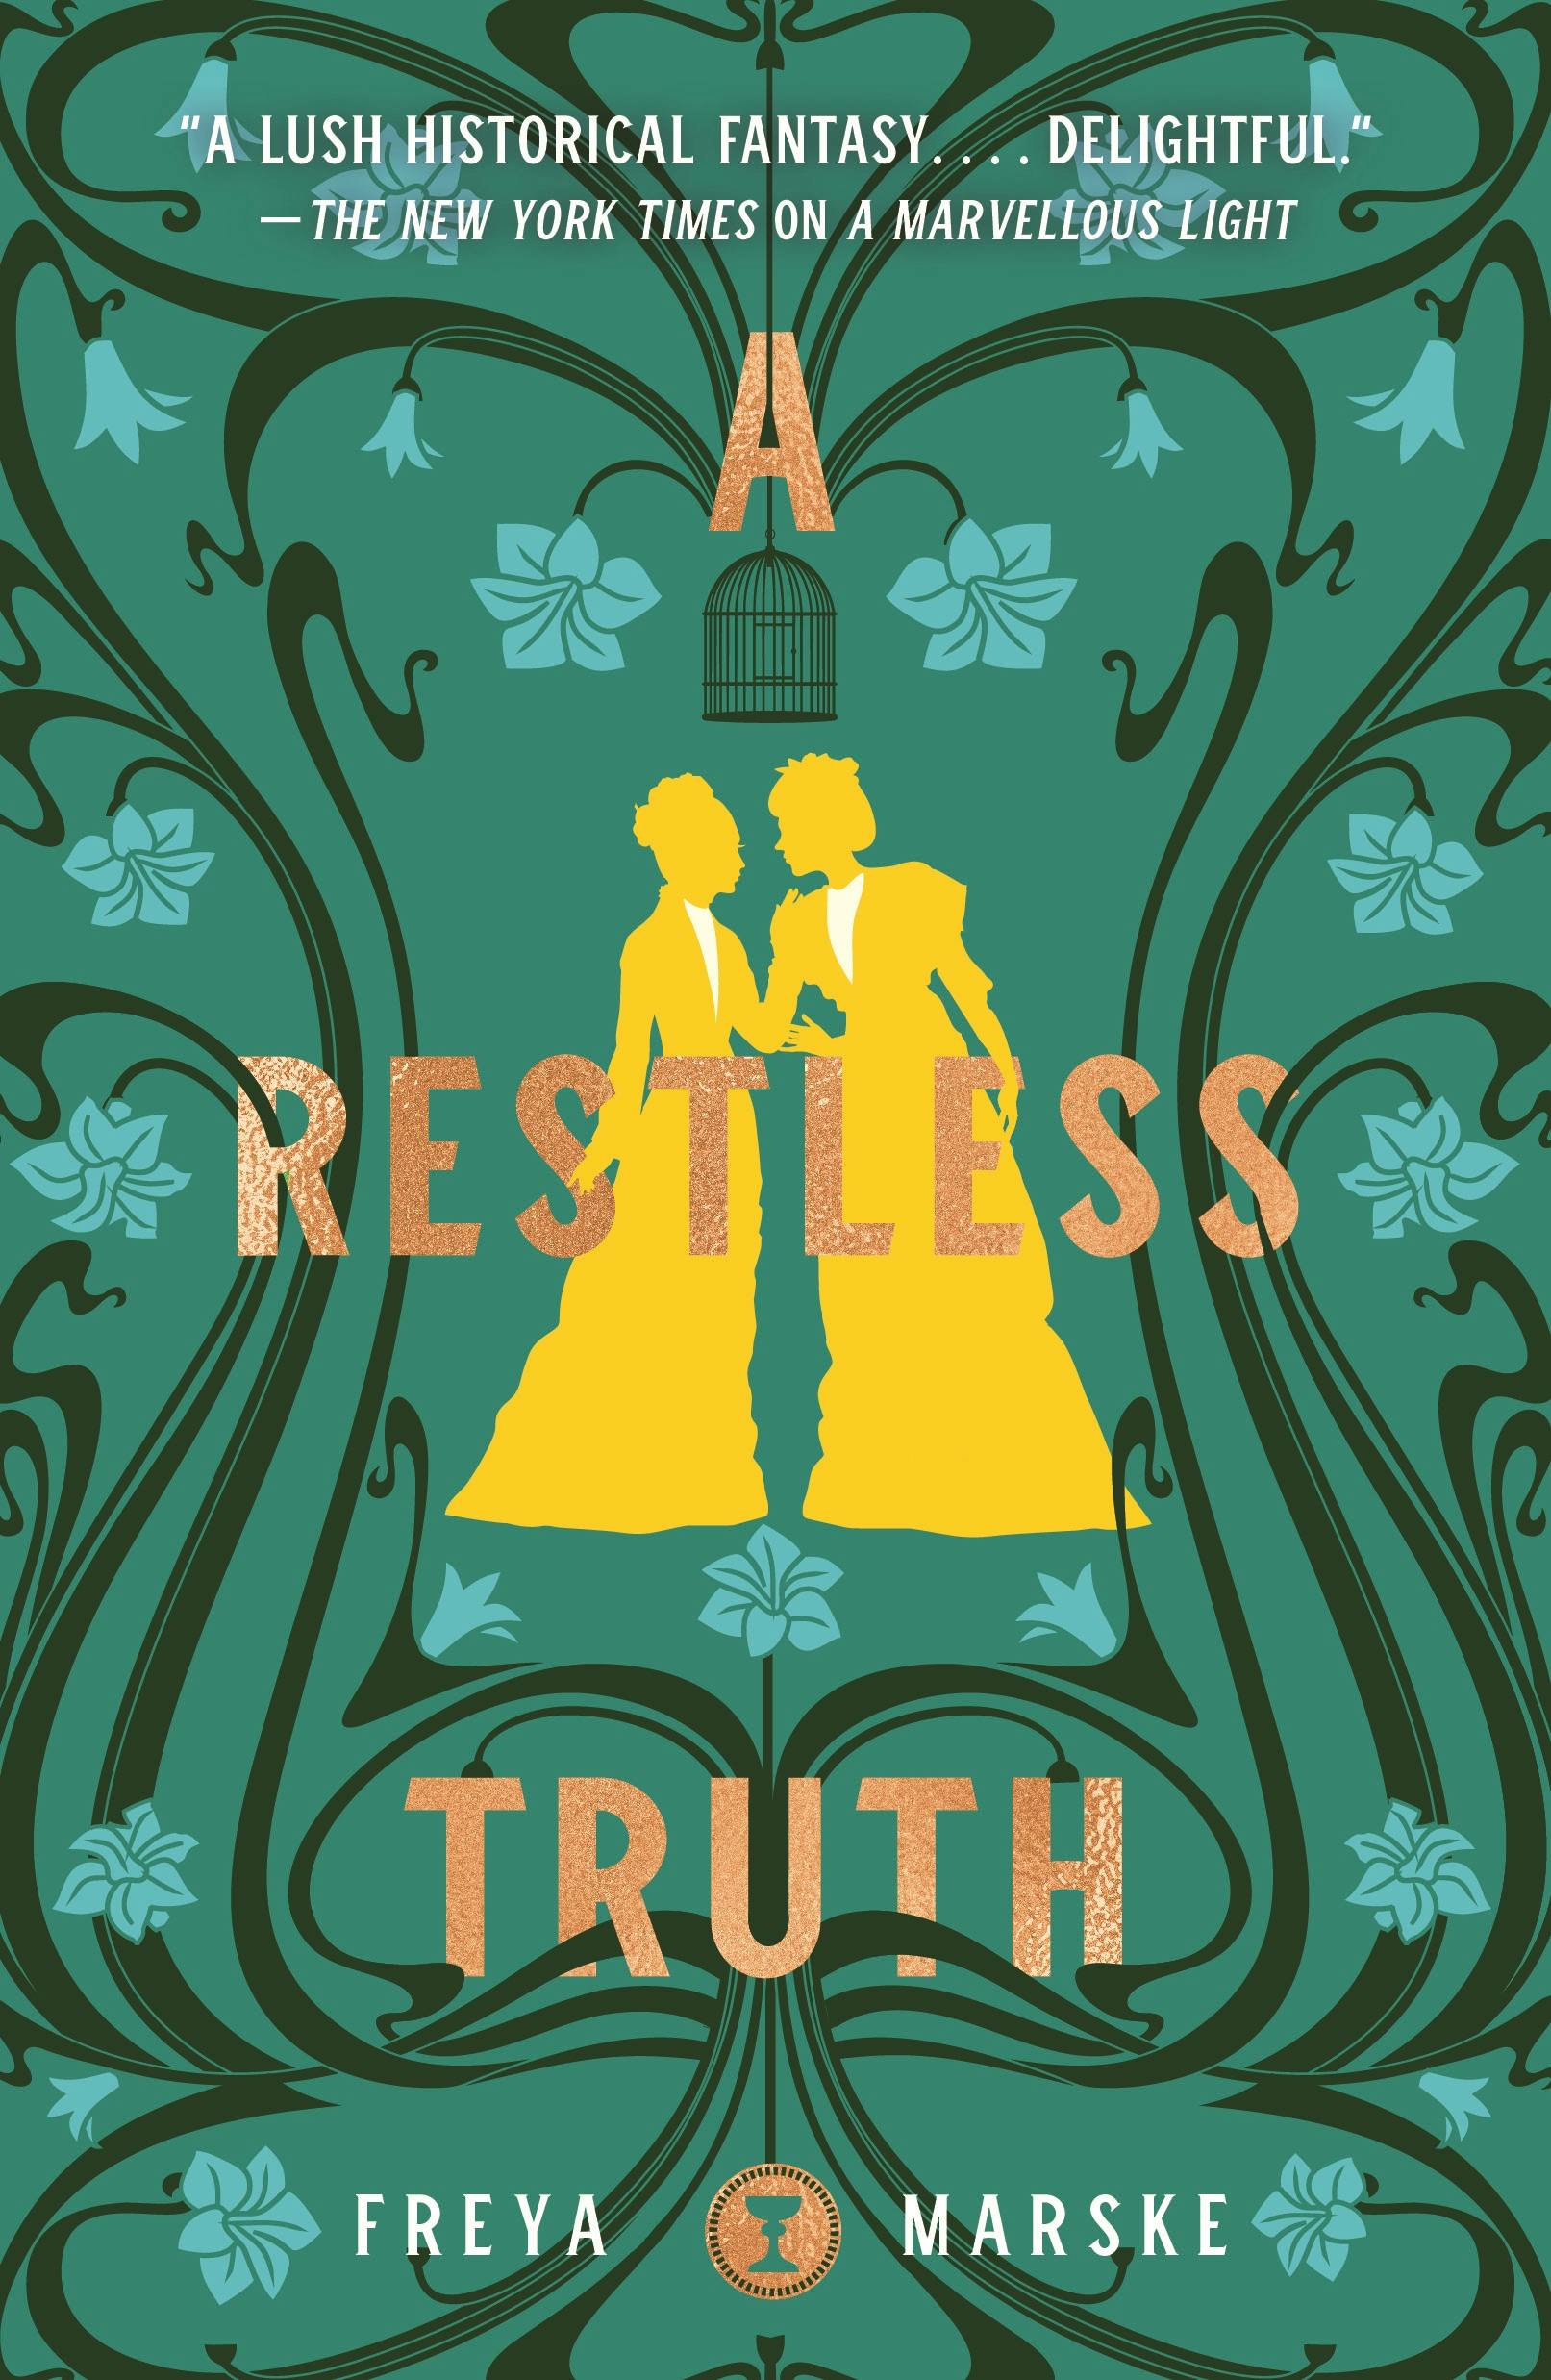 Cover for the book titled as: A Restless Truth